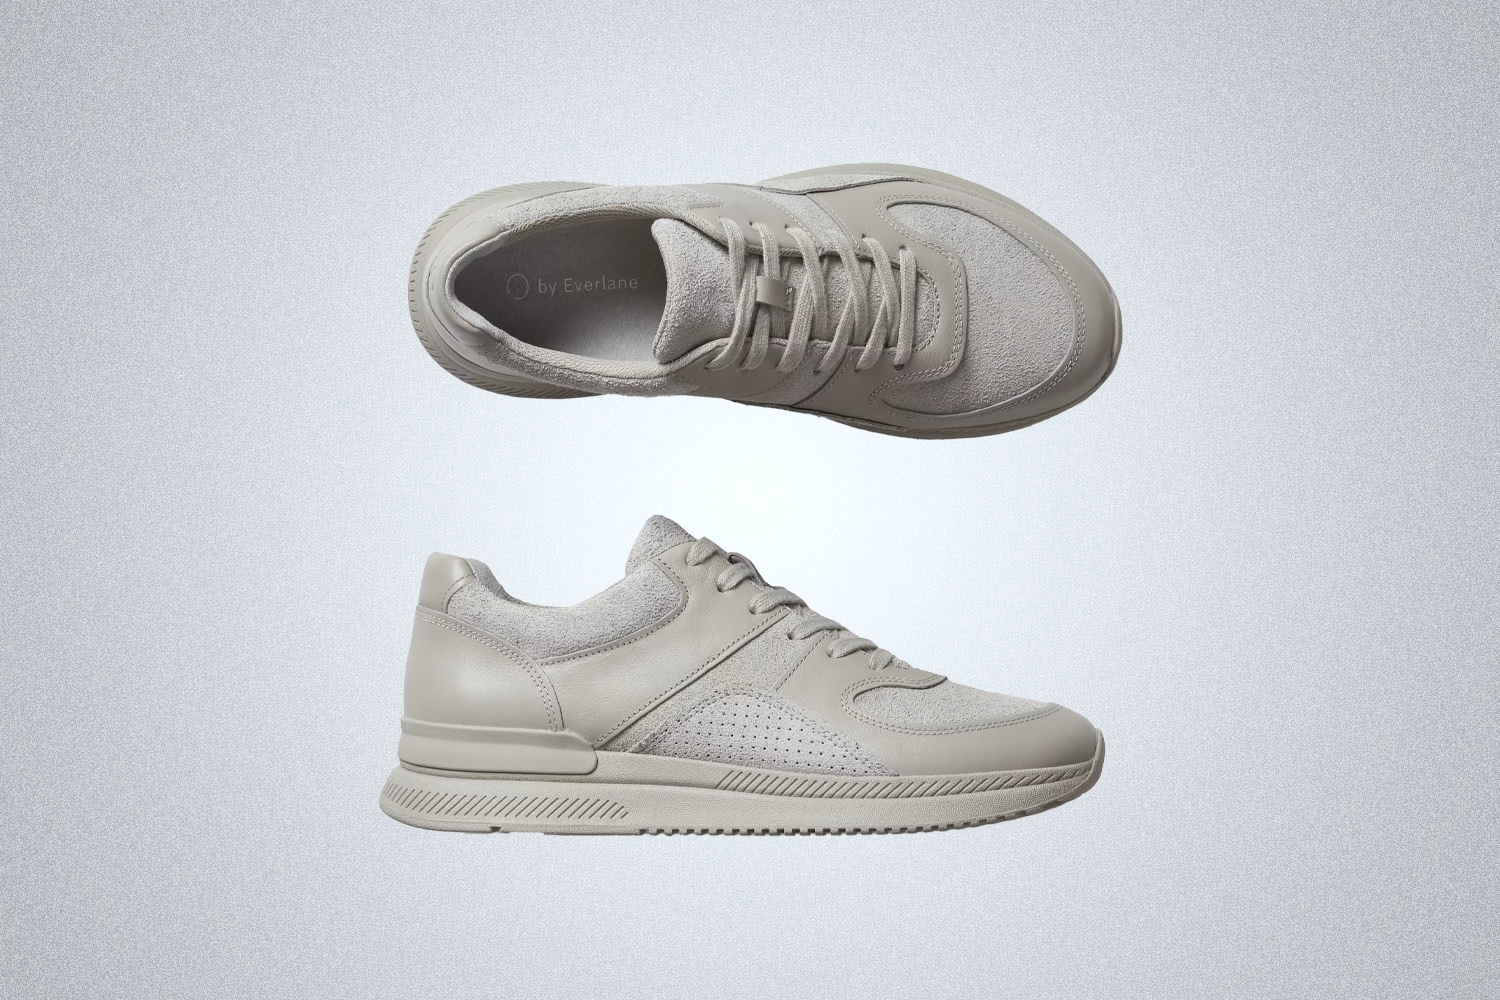 The Trainer shoes from everlane in glacier grey